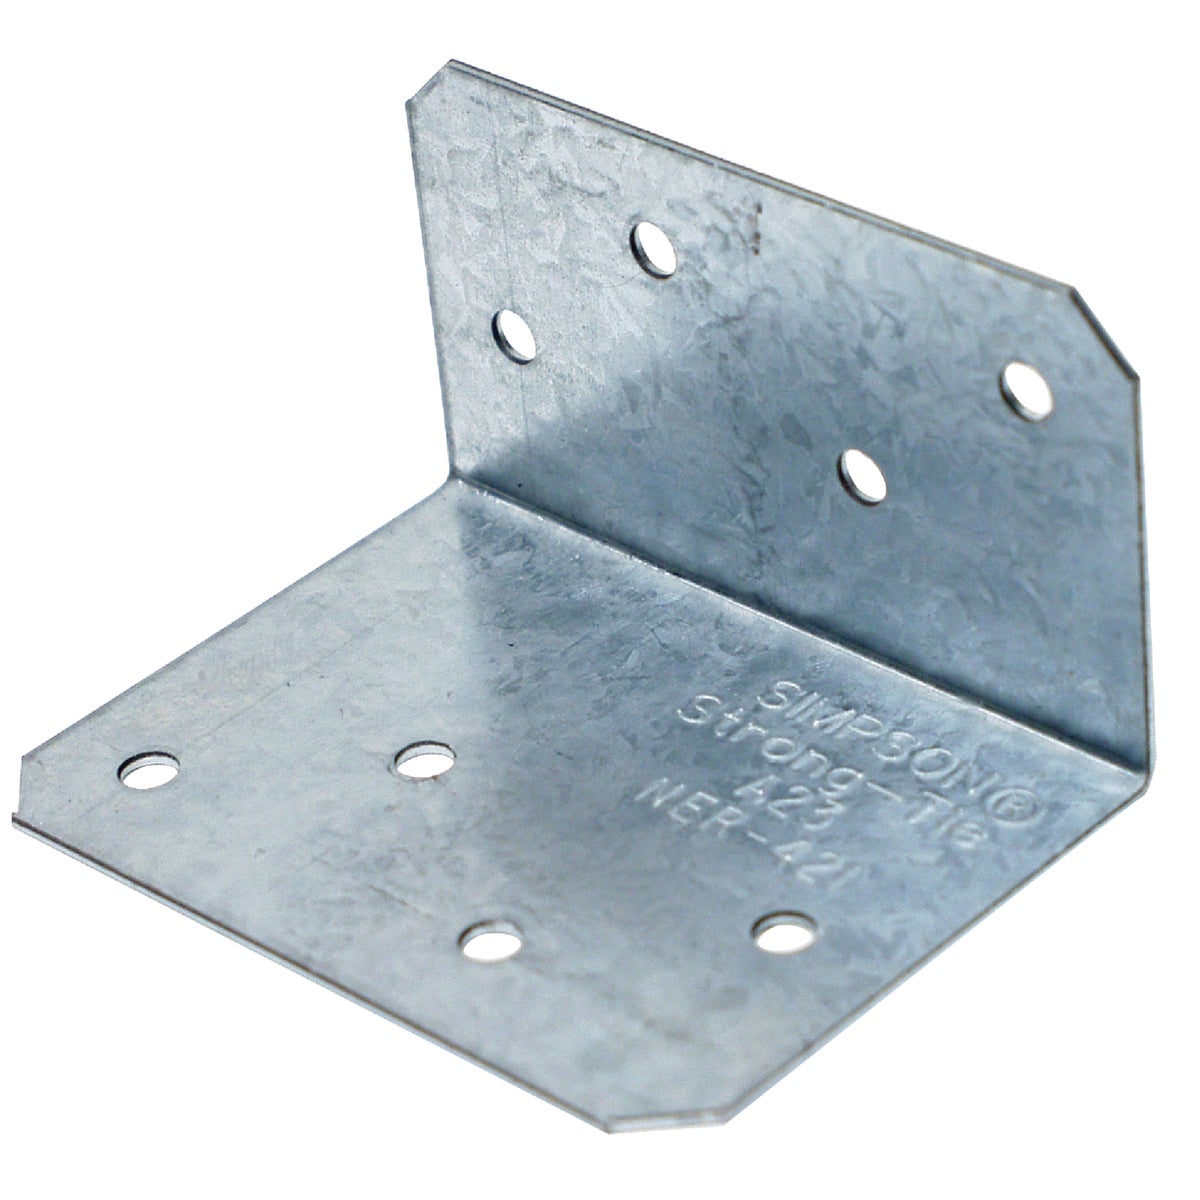 Simpson Strong-Tie ZMax 2 In. x 1-1/2 In. x 2-3/4 In. Galvanized Steel 18 ga Reinforcing Angle